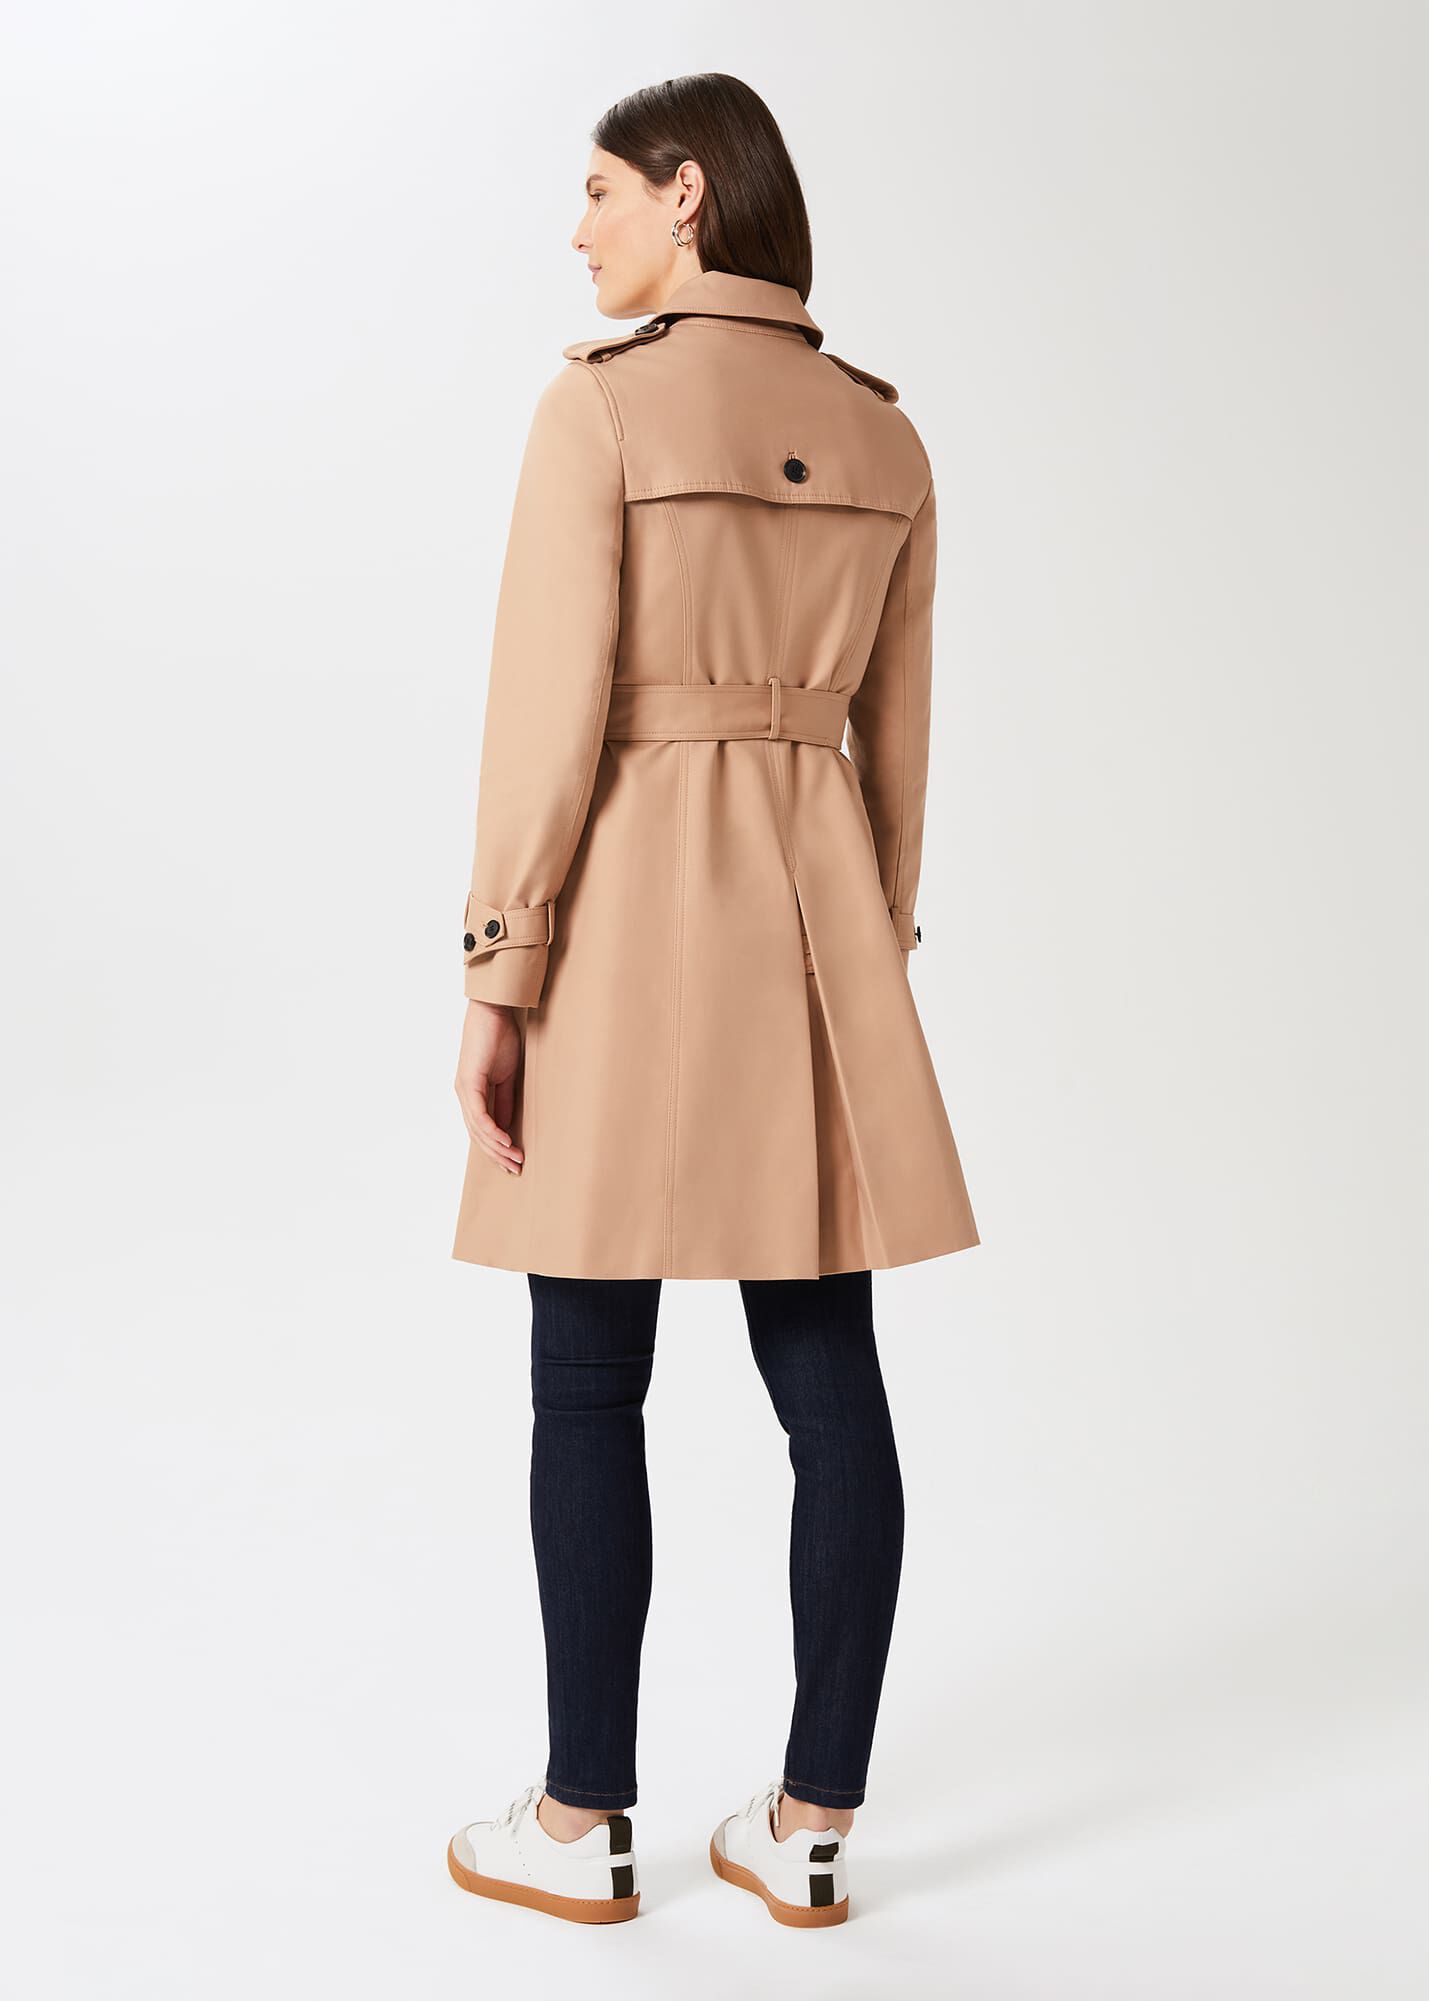 Via Spiga Womens Single-Breasted Trench Coat with Color-Block Hem 